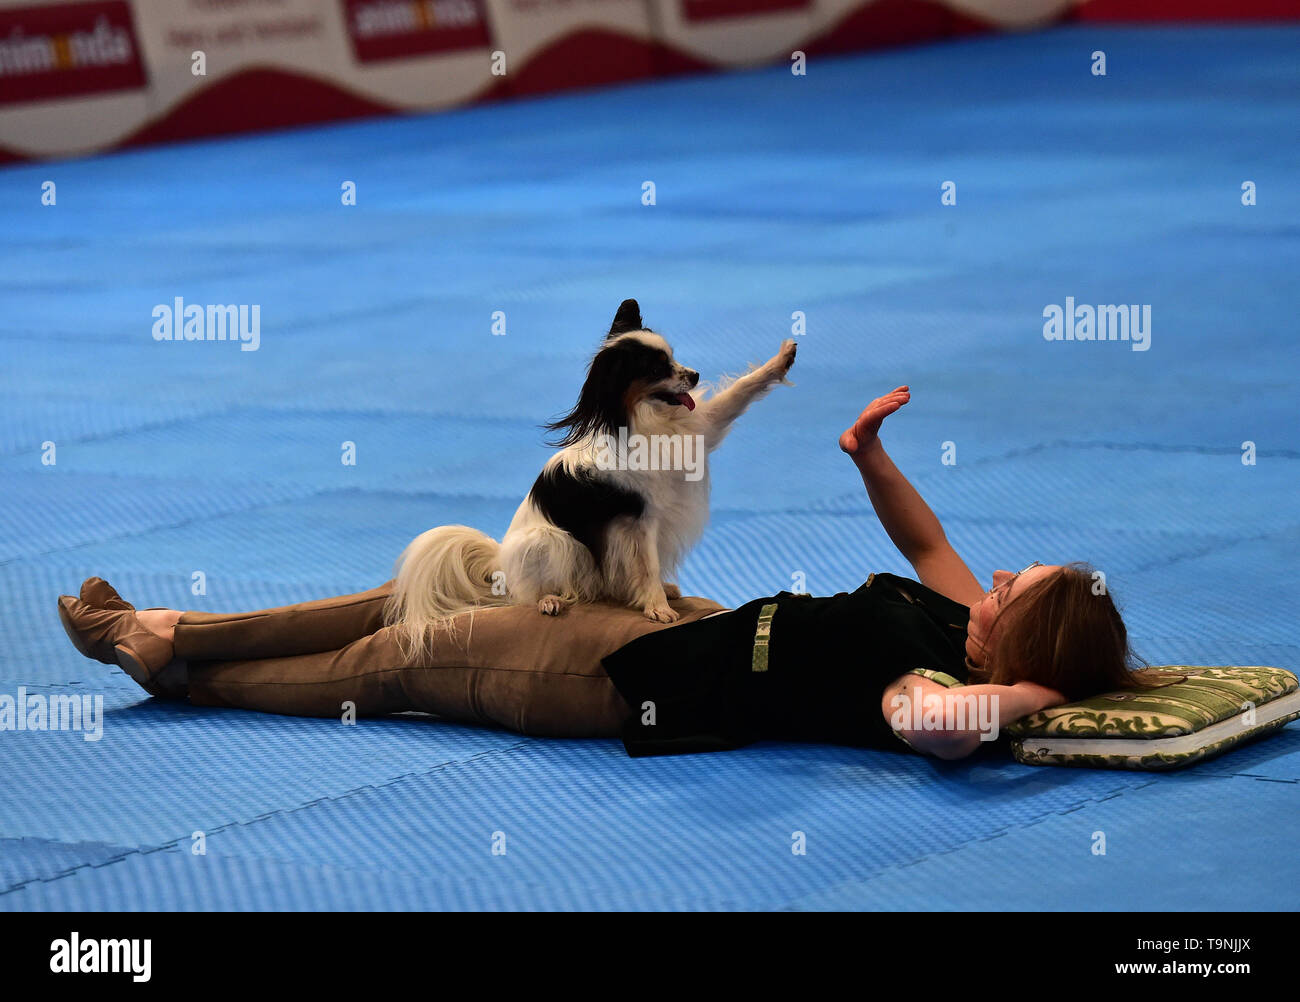 Dortmund, Germany. 19th May, 2019. Cora Czermak from Germany attends the 'Dog Dancing' competition with her dog Steps, a Papillon, during the Hund and Katz exhibition in Dortmund, Germany, on May 19, 2019. The three-day event hosted by German Kennel Club, presents dogs and cats of more than 200 breeds from around the world. Credit: Lu Yang/Xinhua/Alamy Live News Stock Photo